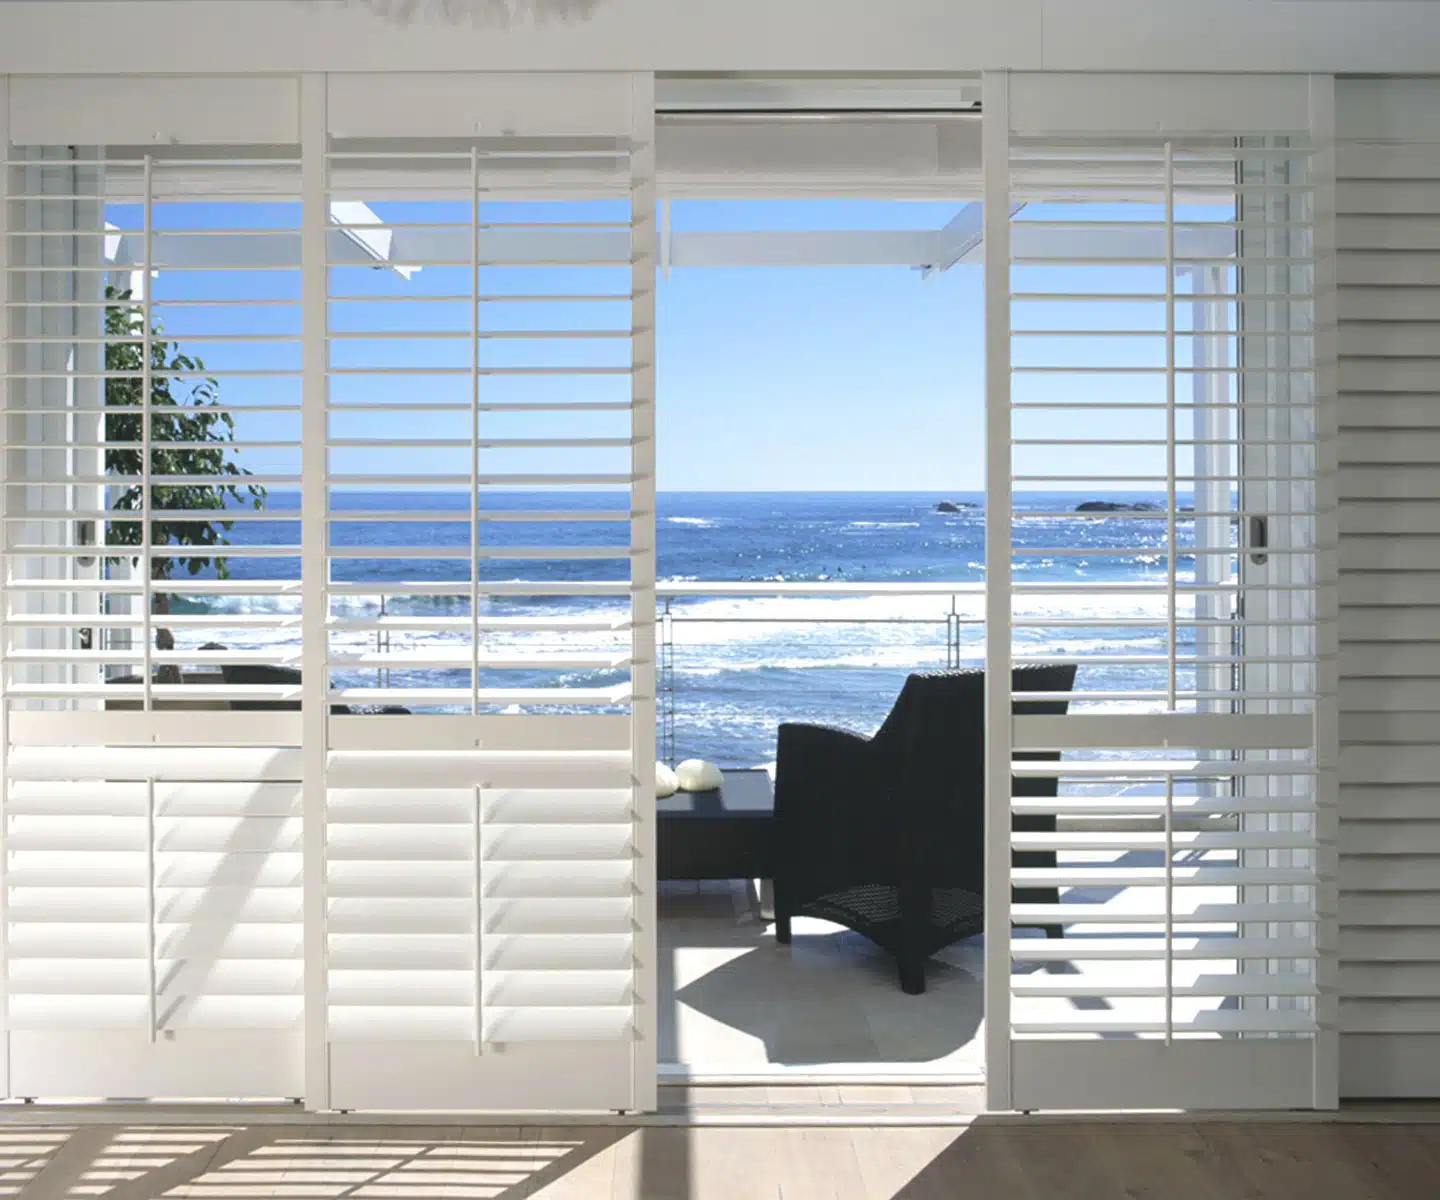 Gorgeous ocean view through Brightwood blinds from a Falls Church, Va resident